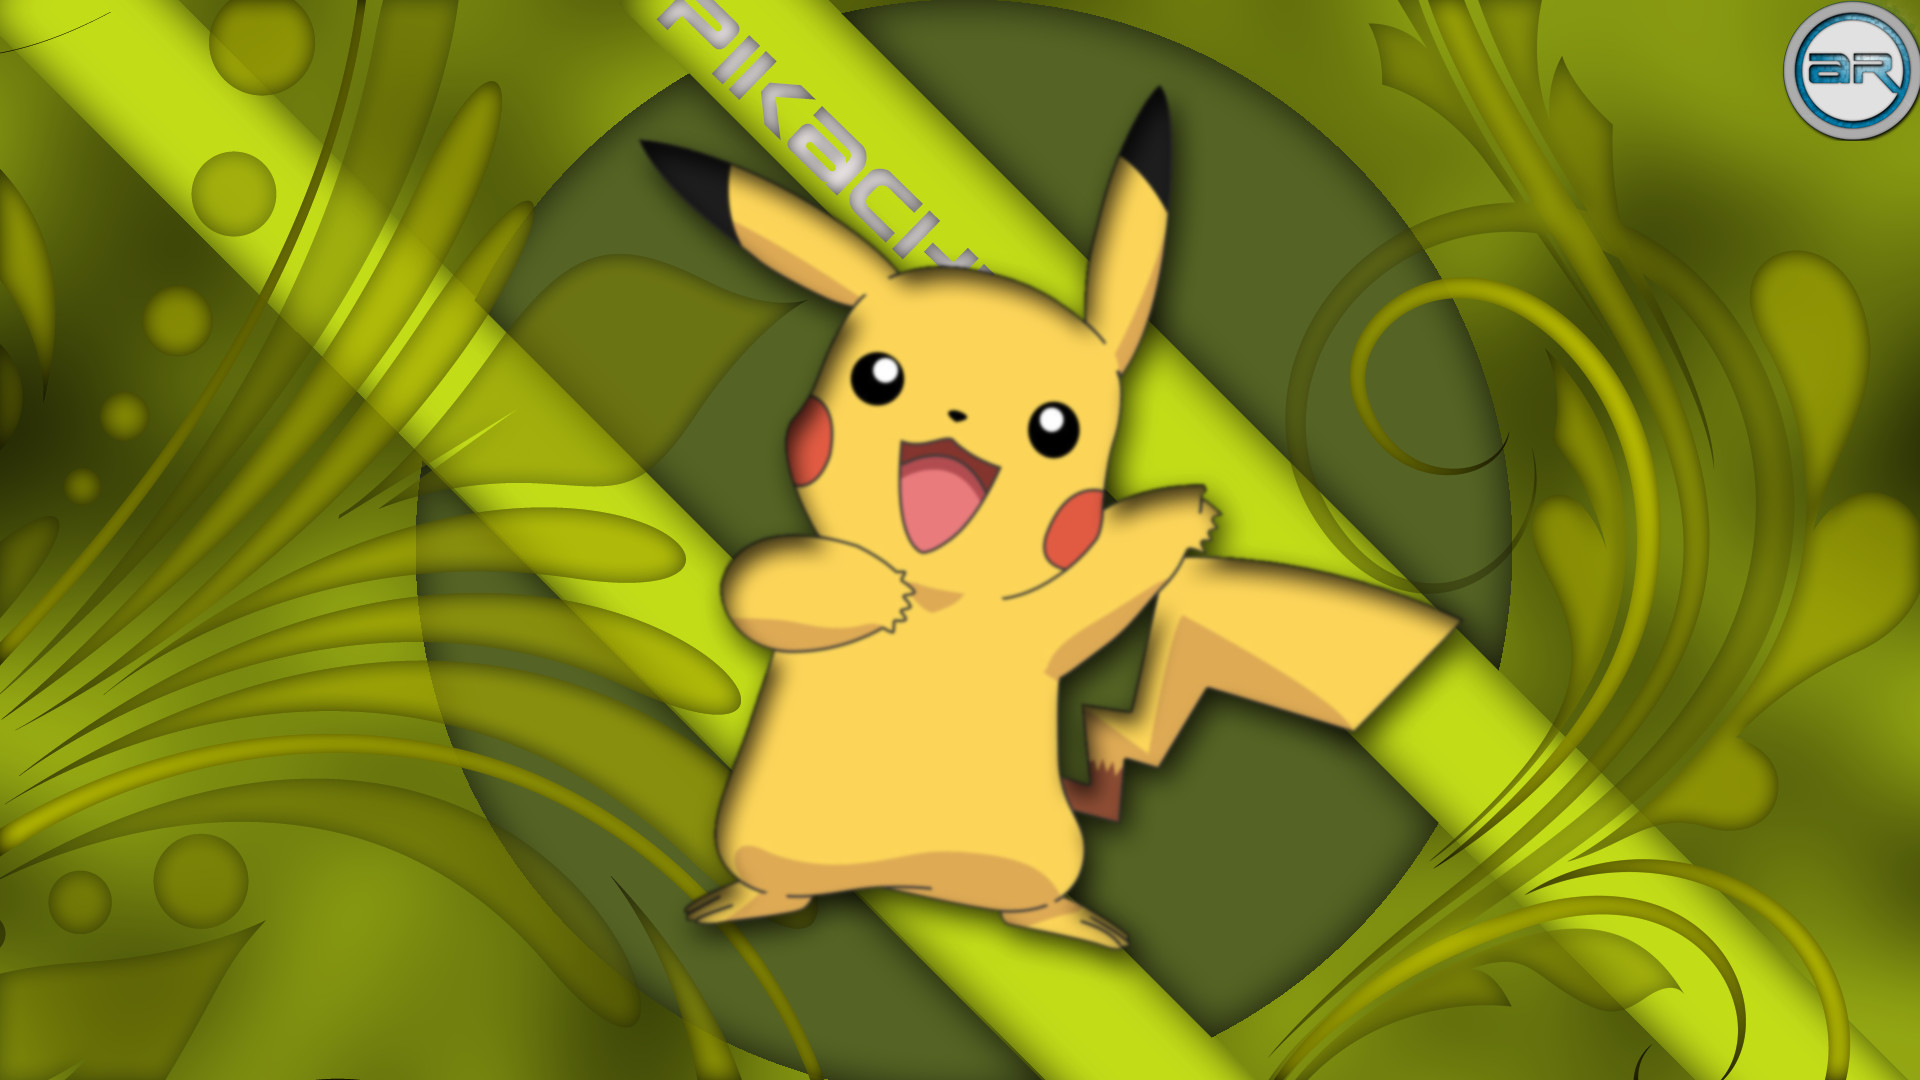 1920x1080 Free Pikachu backgrounds download.